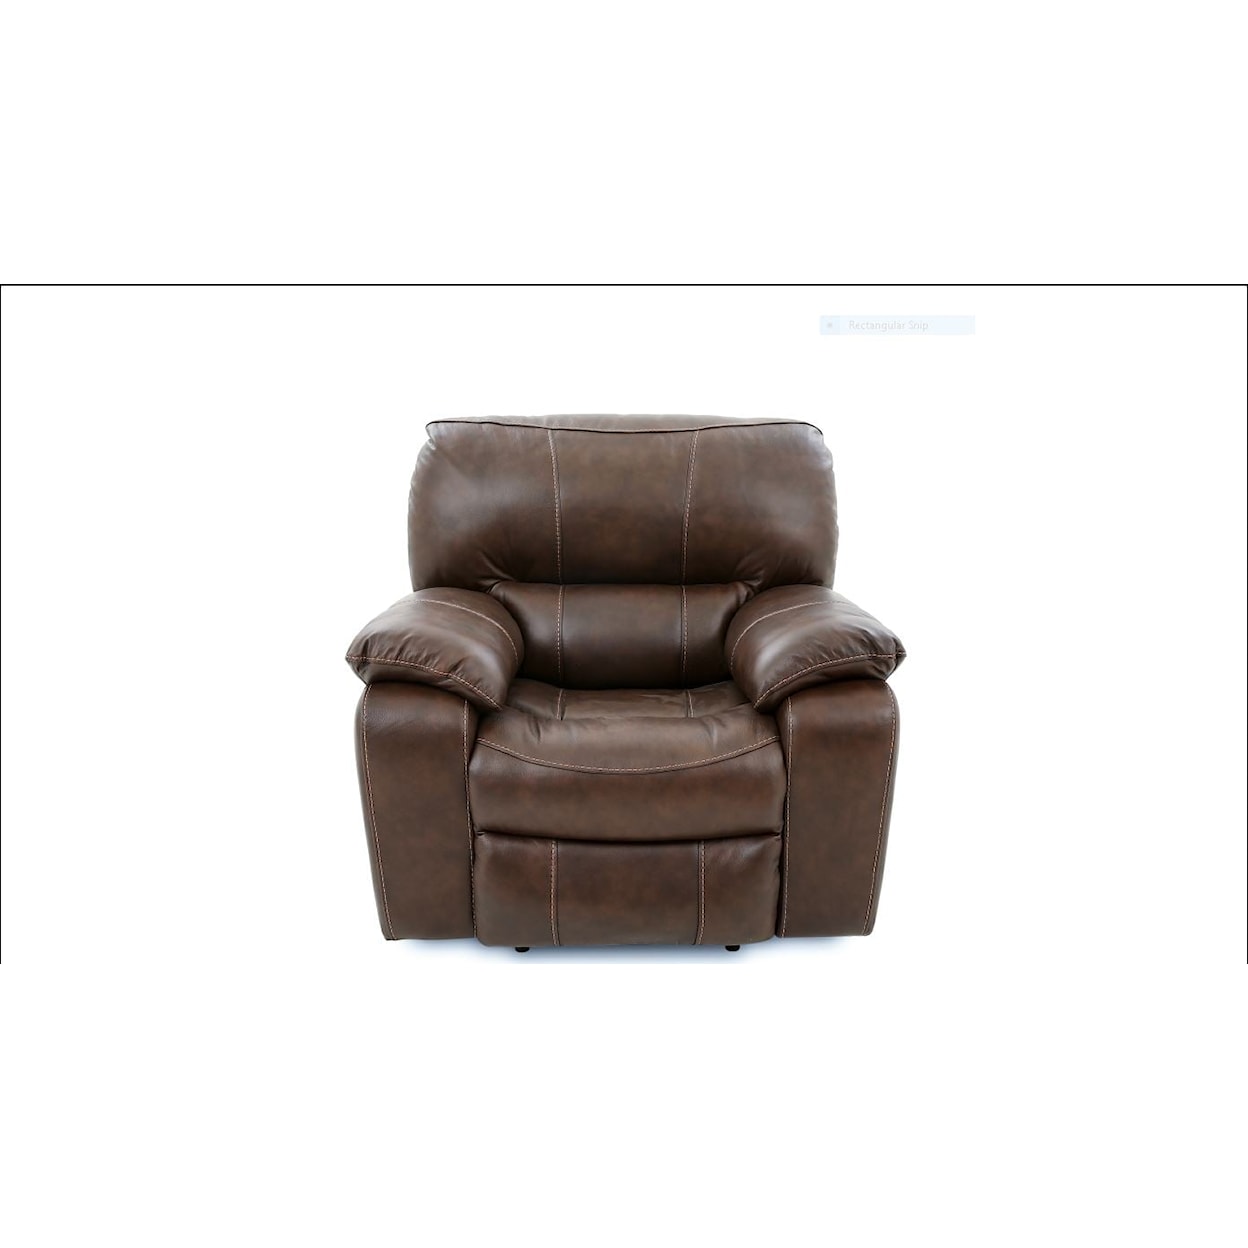 Cheers UX8625M Leather Glider Recliner